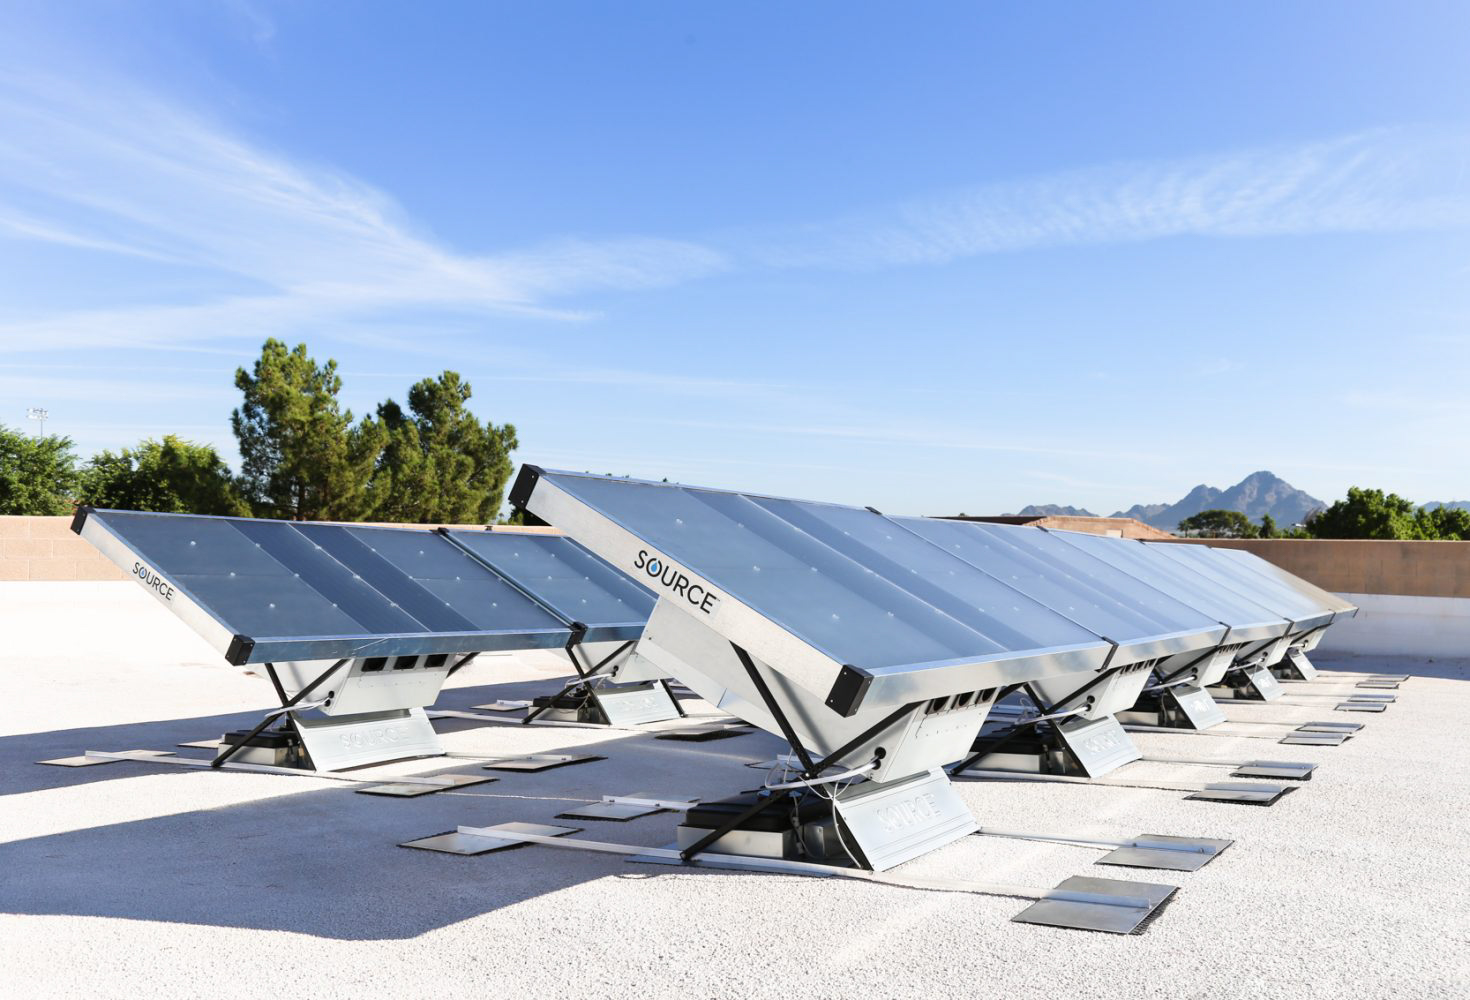  Zero Mass Water aims to convert your rooftop into a water production plant with the Source hydropanel, a device capable of producing drinking water from sunlight and air. Image: Zero Mass Water.